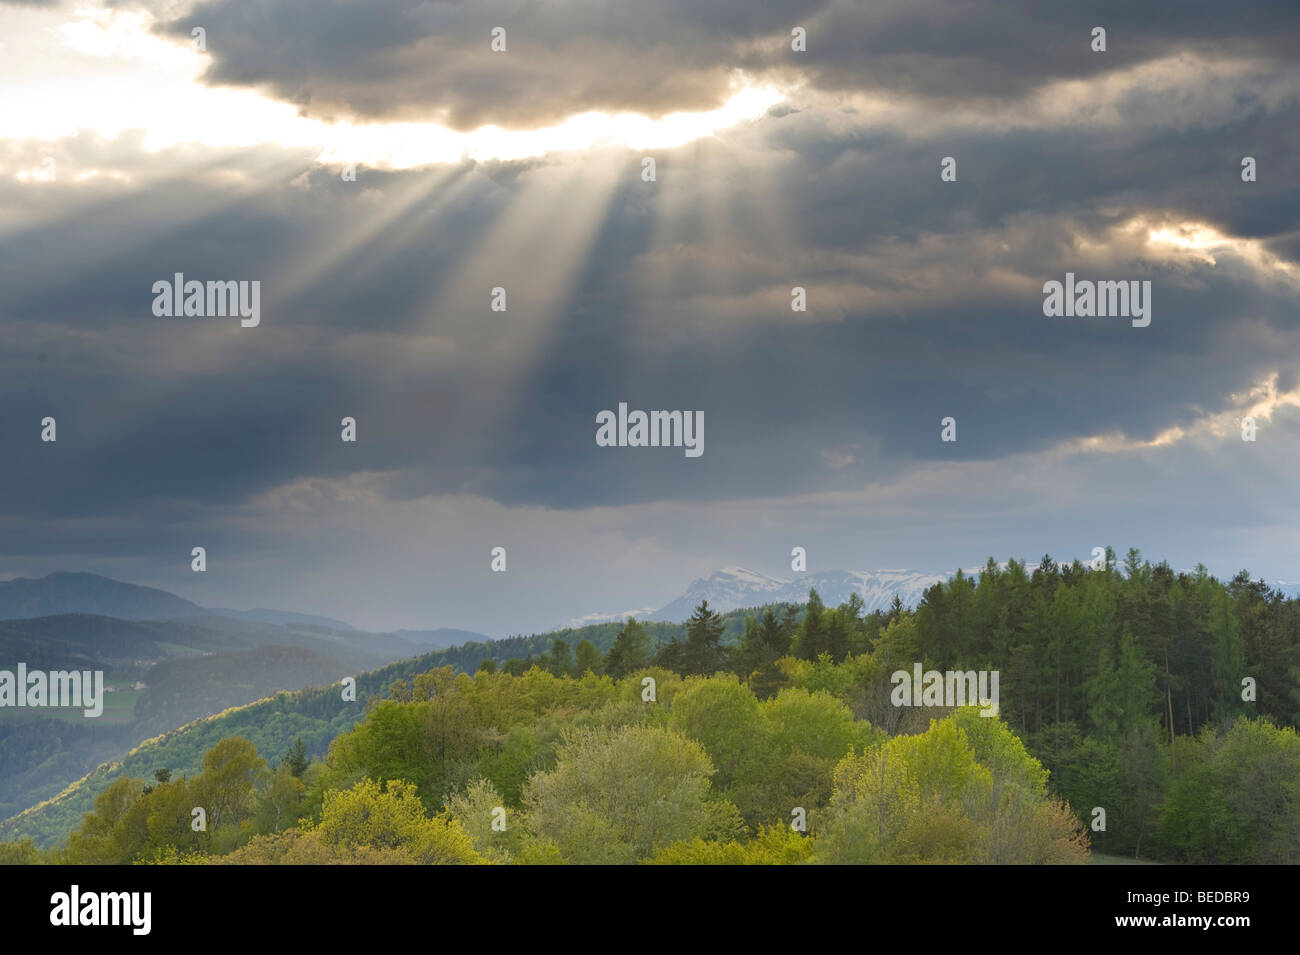 View towards Rax mountain range and Heukuppe peak with an approaching thunderstorm, Bucklige Welt, Lower Austria, Austria, Euro Stock Photo